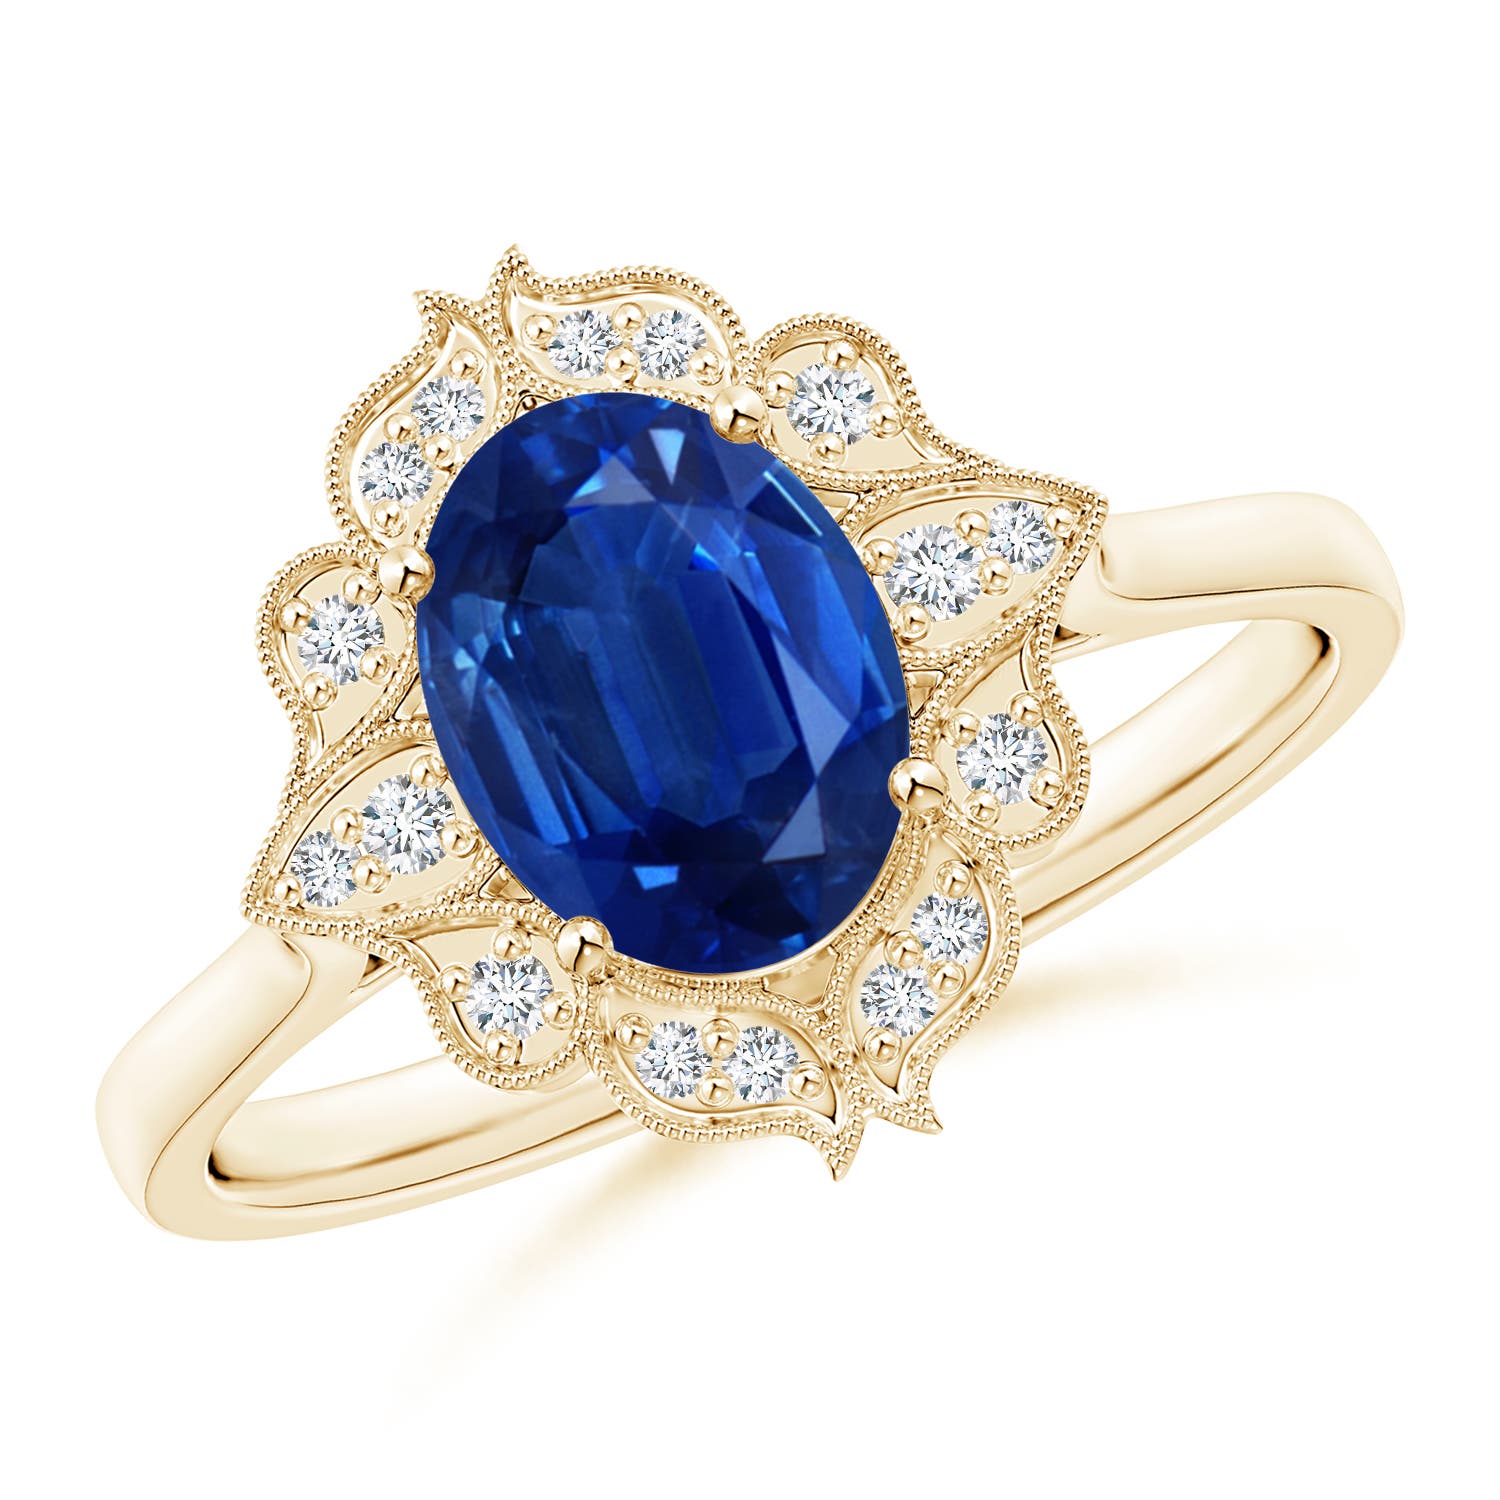 AAA - Blue Sapphire / 1.65 CT / 14 KT Yellow Gold